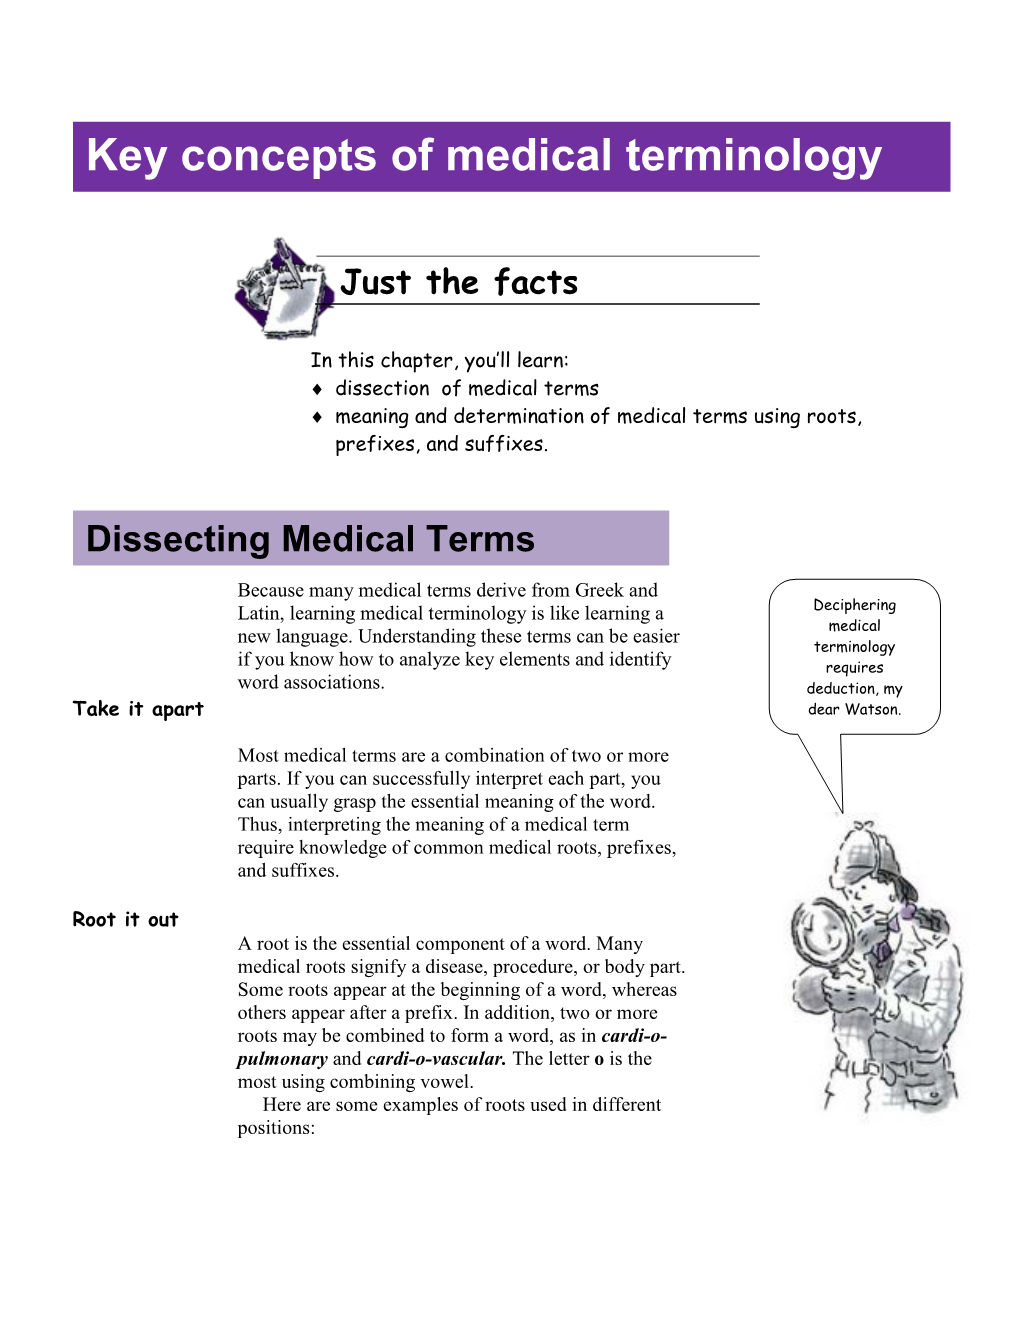 Key Concepts of Medical Terminology